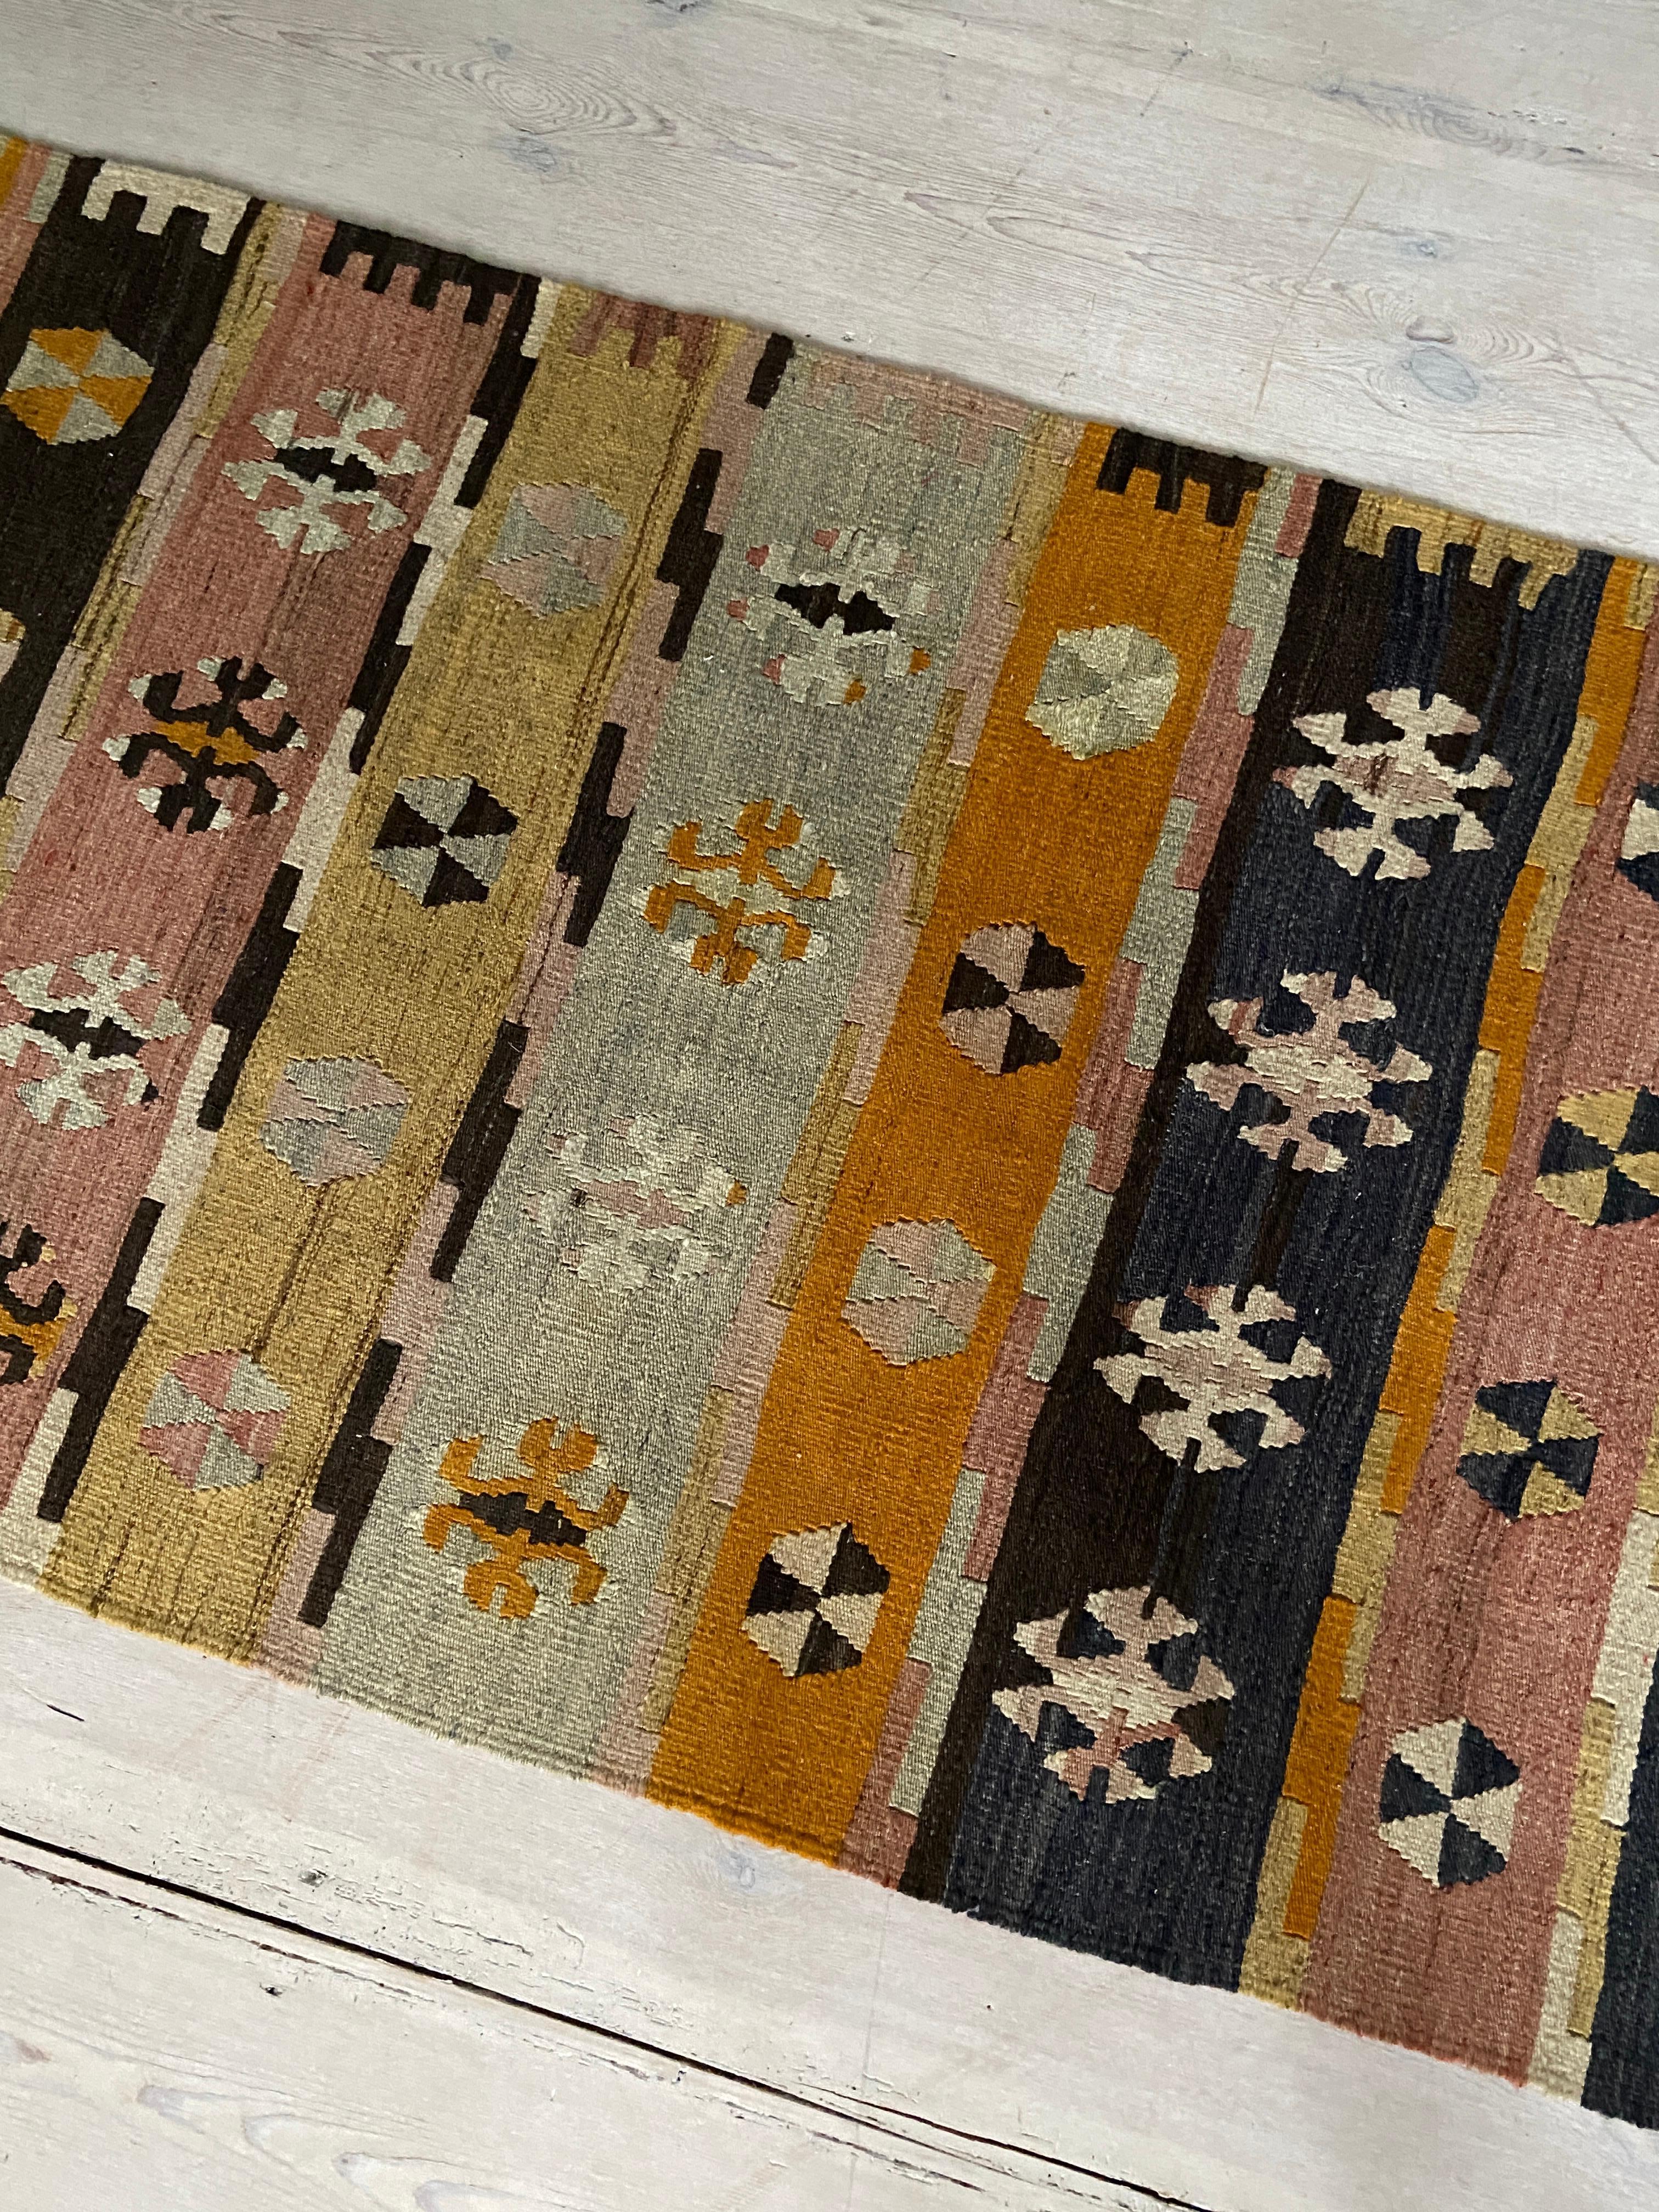 Vintage Striped Anatolian Runner with Geometric Shapes, Turkey, 20th Century For Sale 2